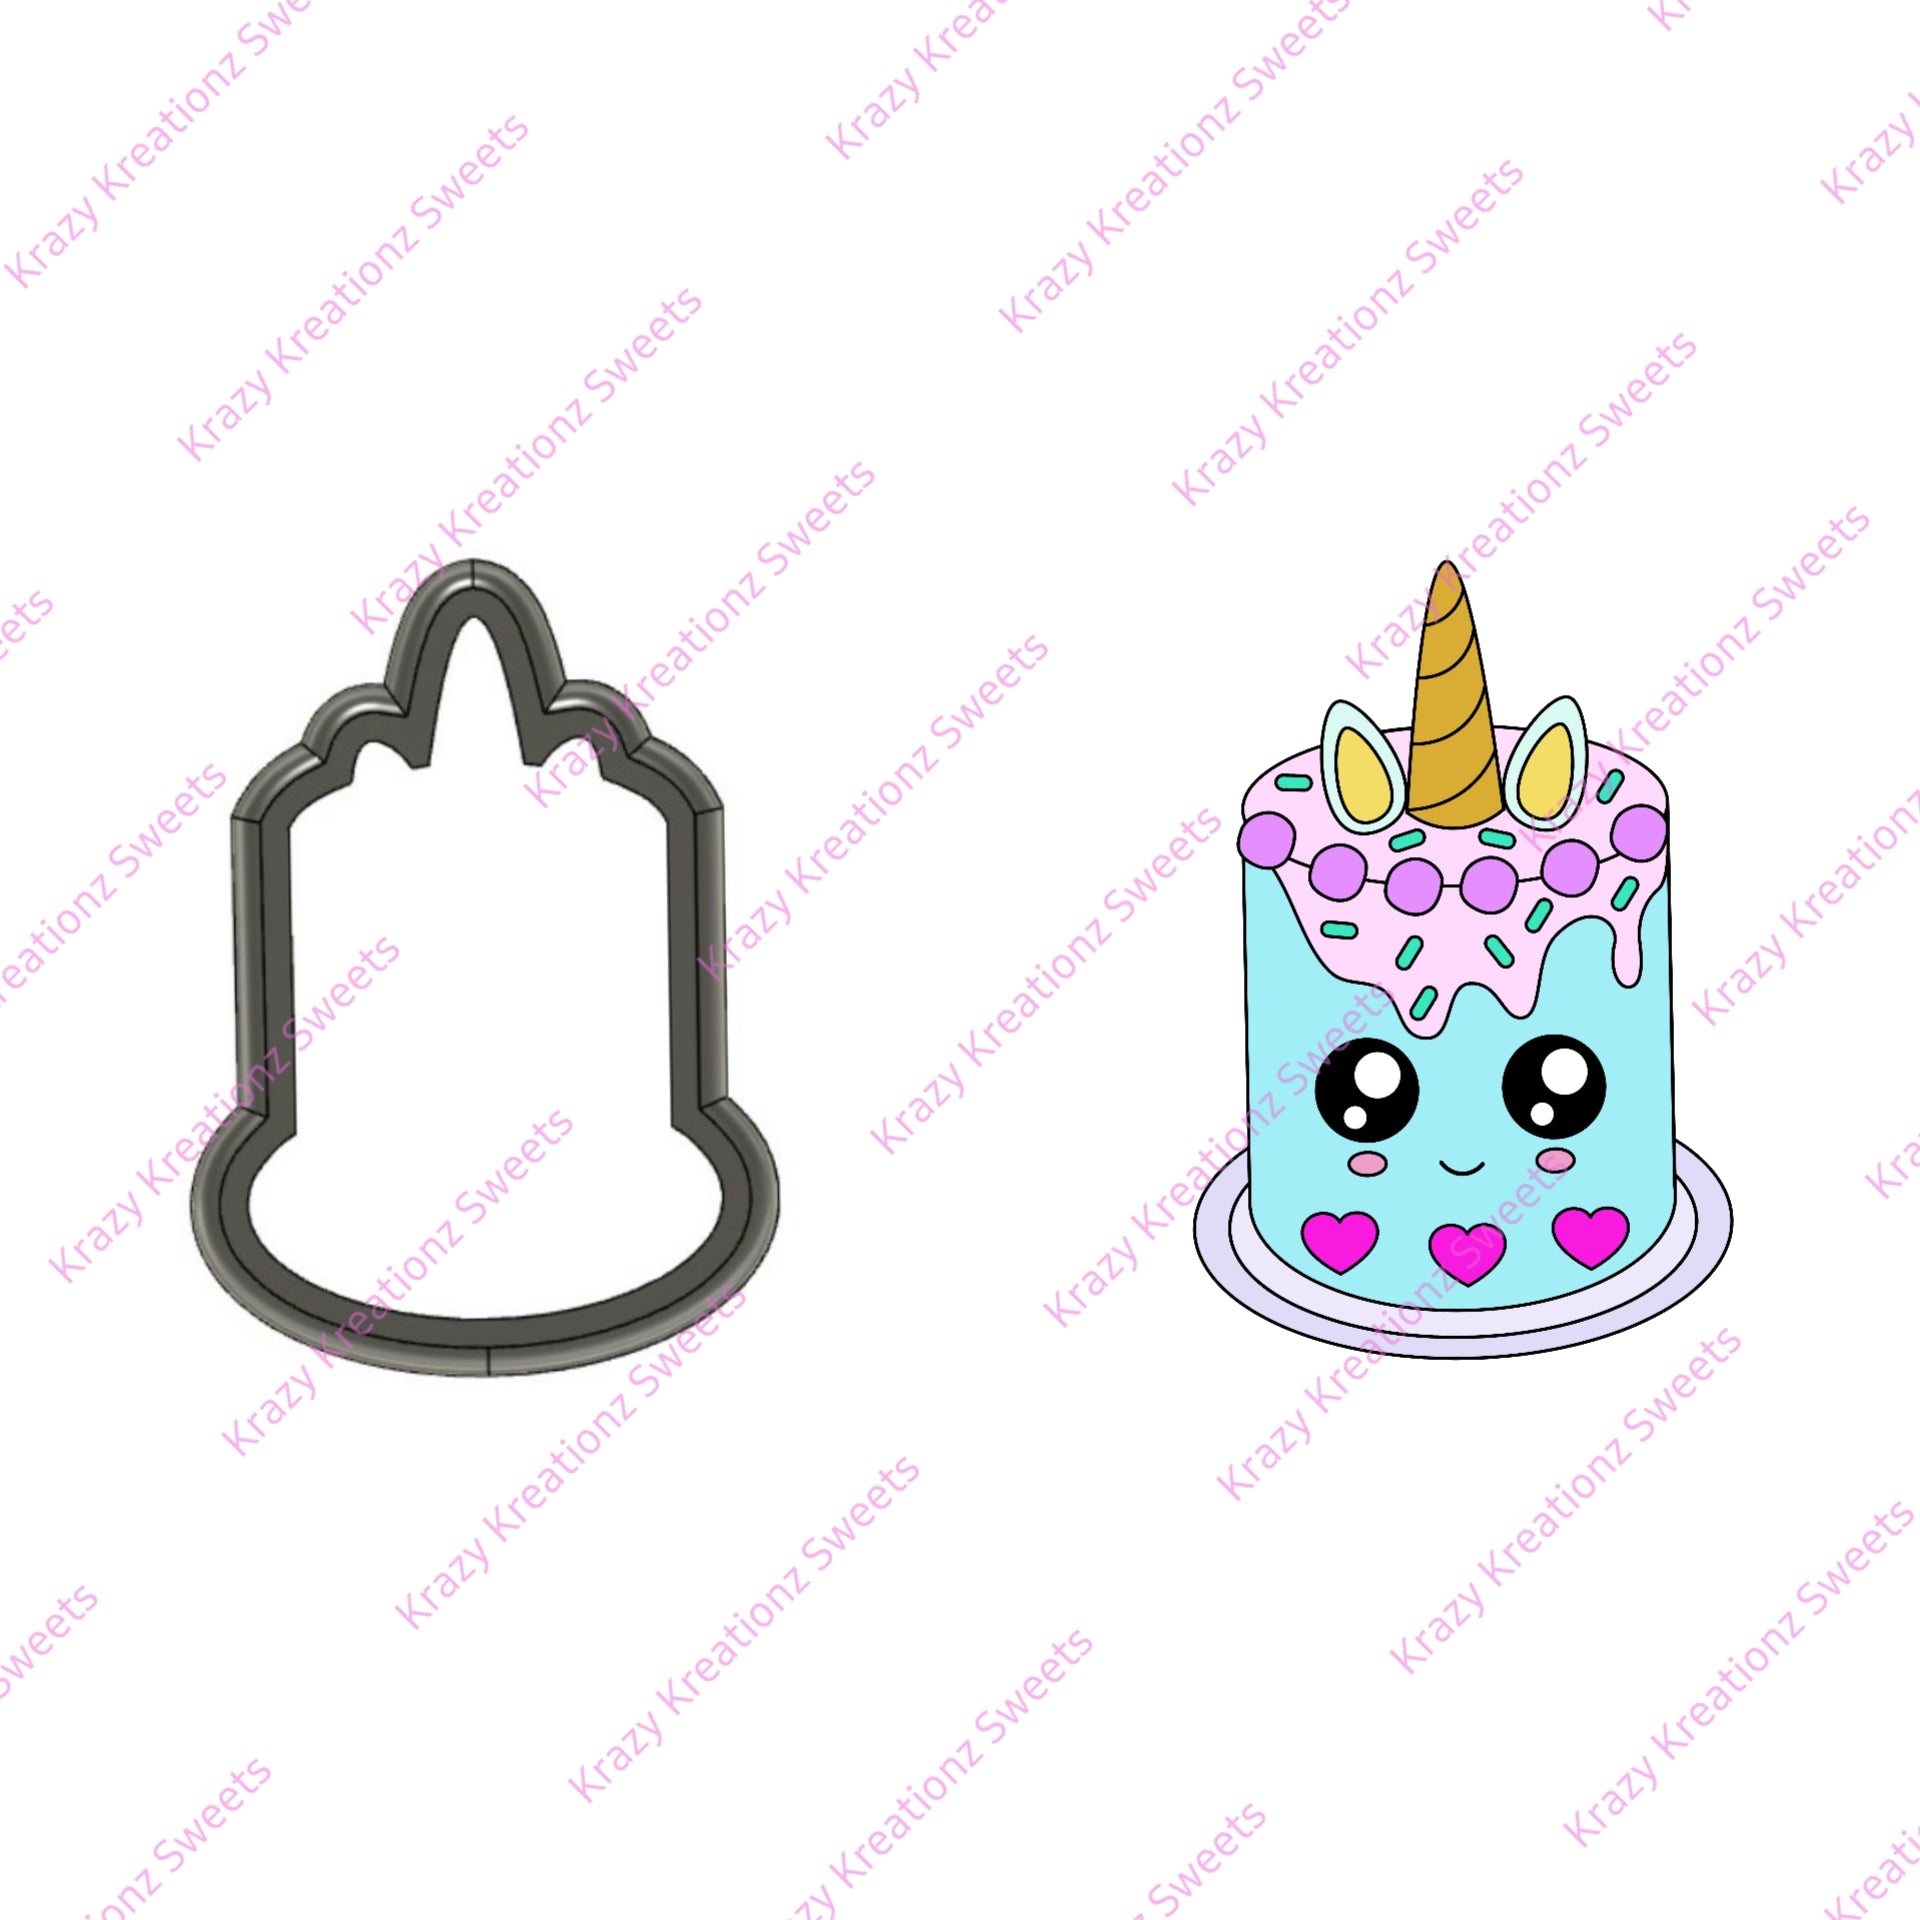 Smiley Unicorn Cake Cookie Cutter